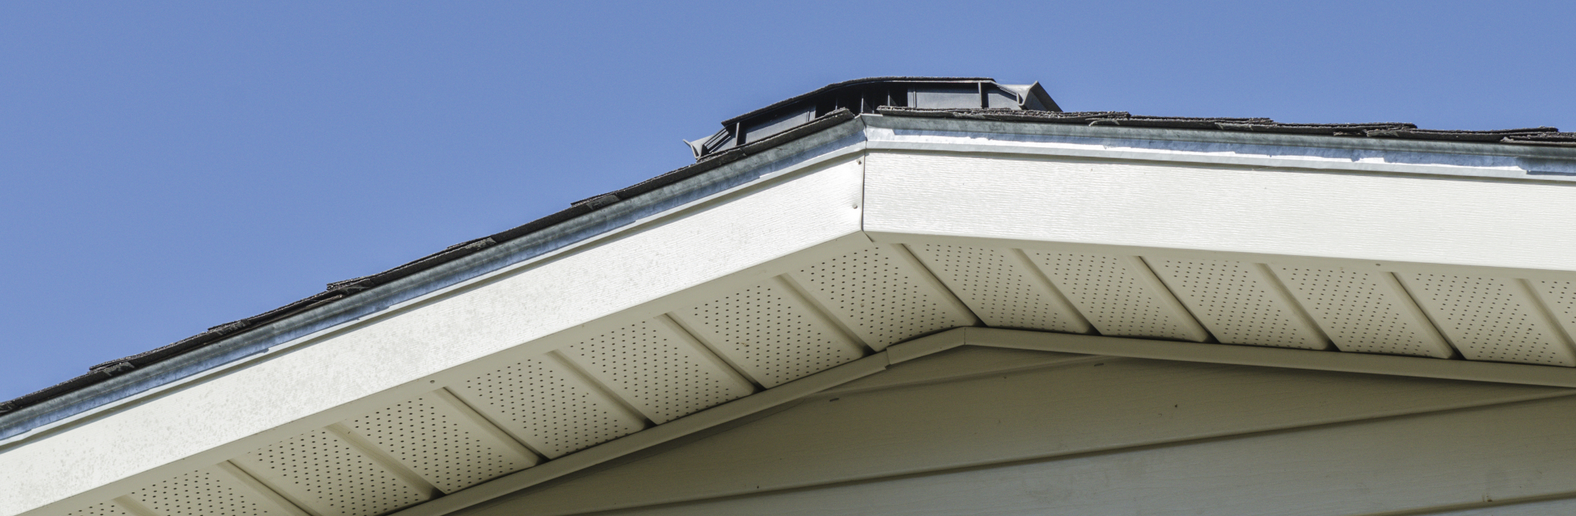 Attic Ventilation in Accessory Structures Roofing